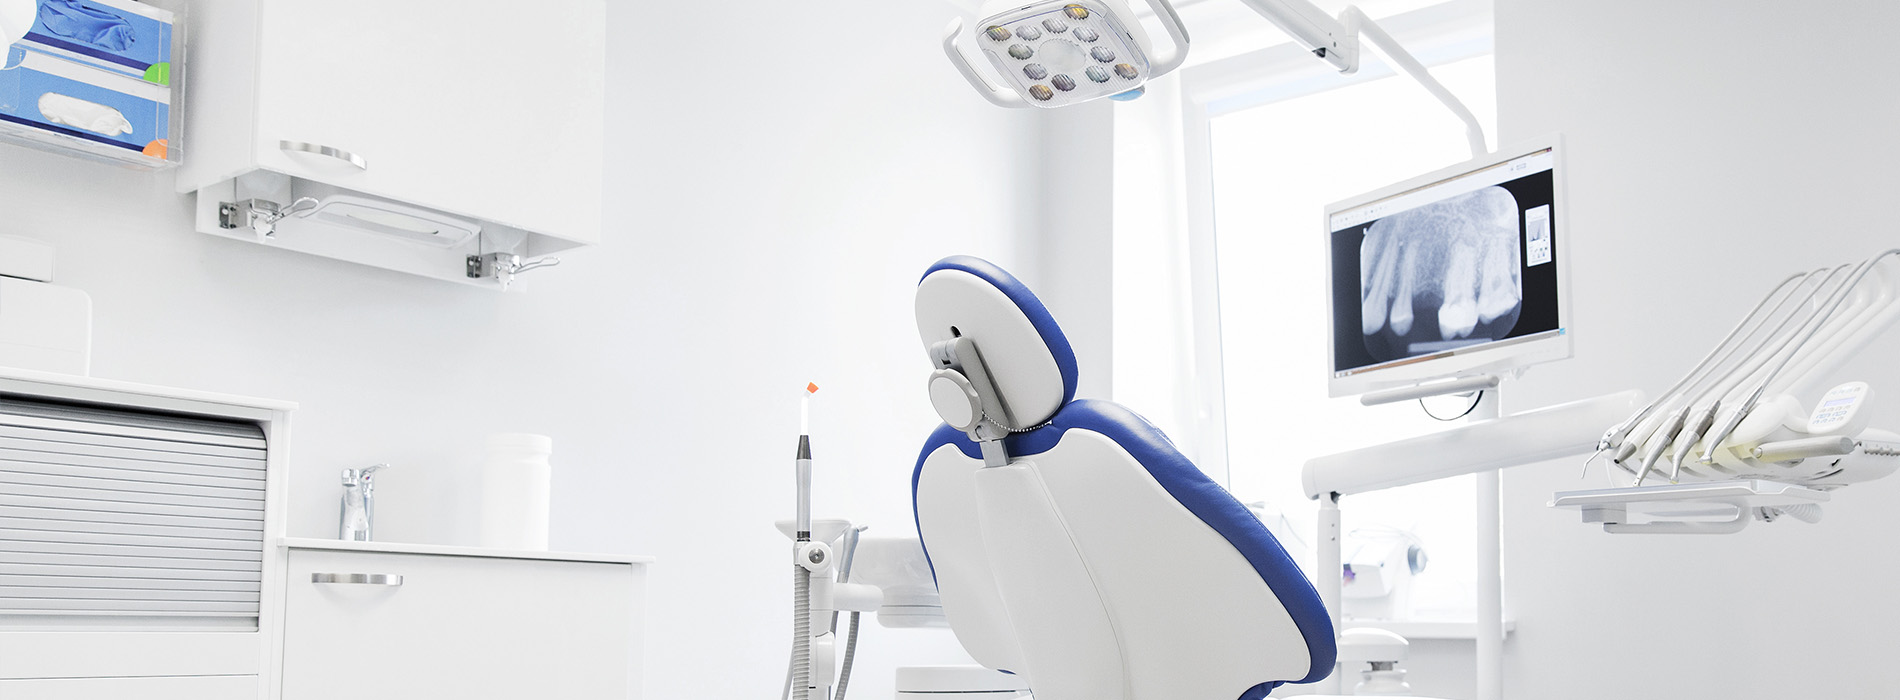 Dental office interior with a modern dental chair and equipment.